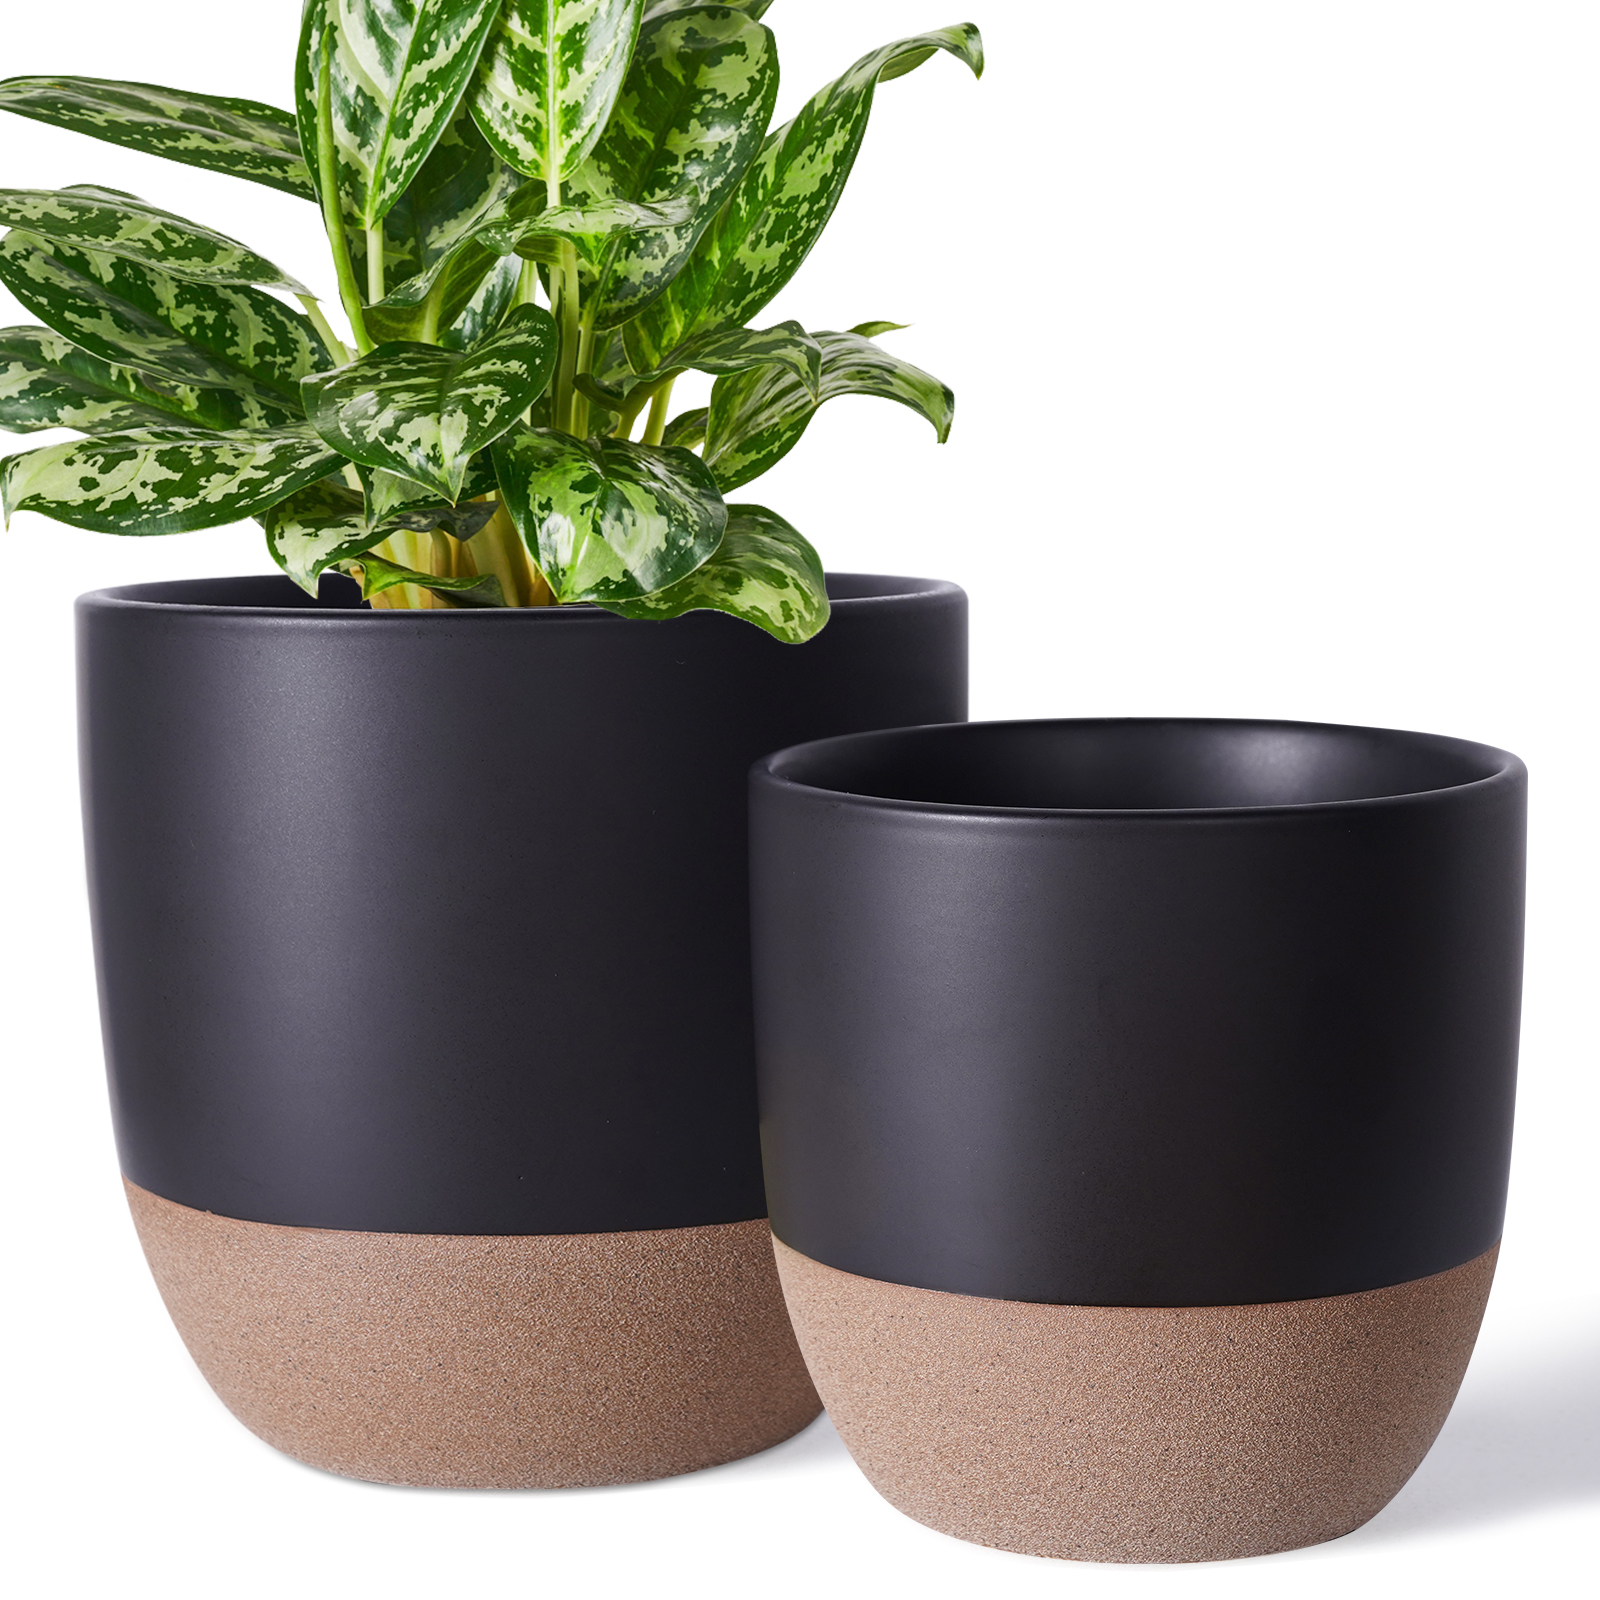 2 Pack Ceramic Planters Indoor with Drainage Hole & Plugs $19.99 AC at Amazon